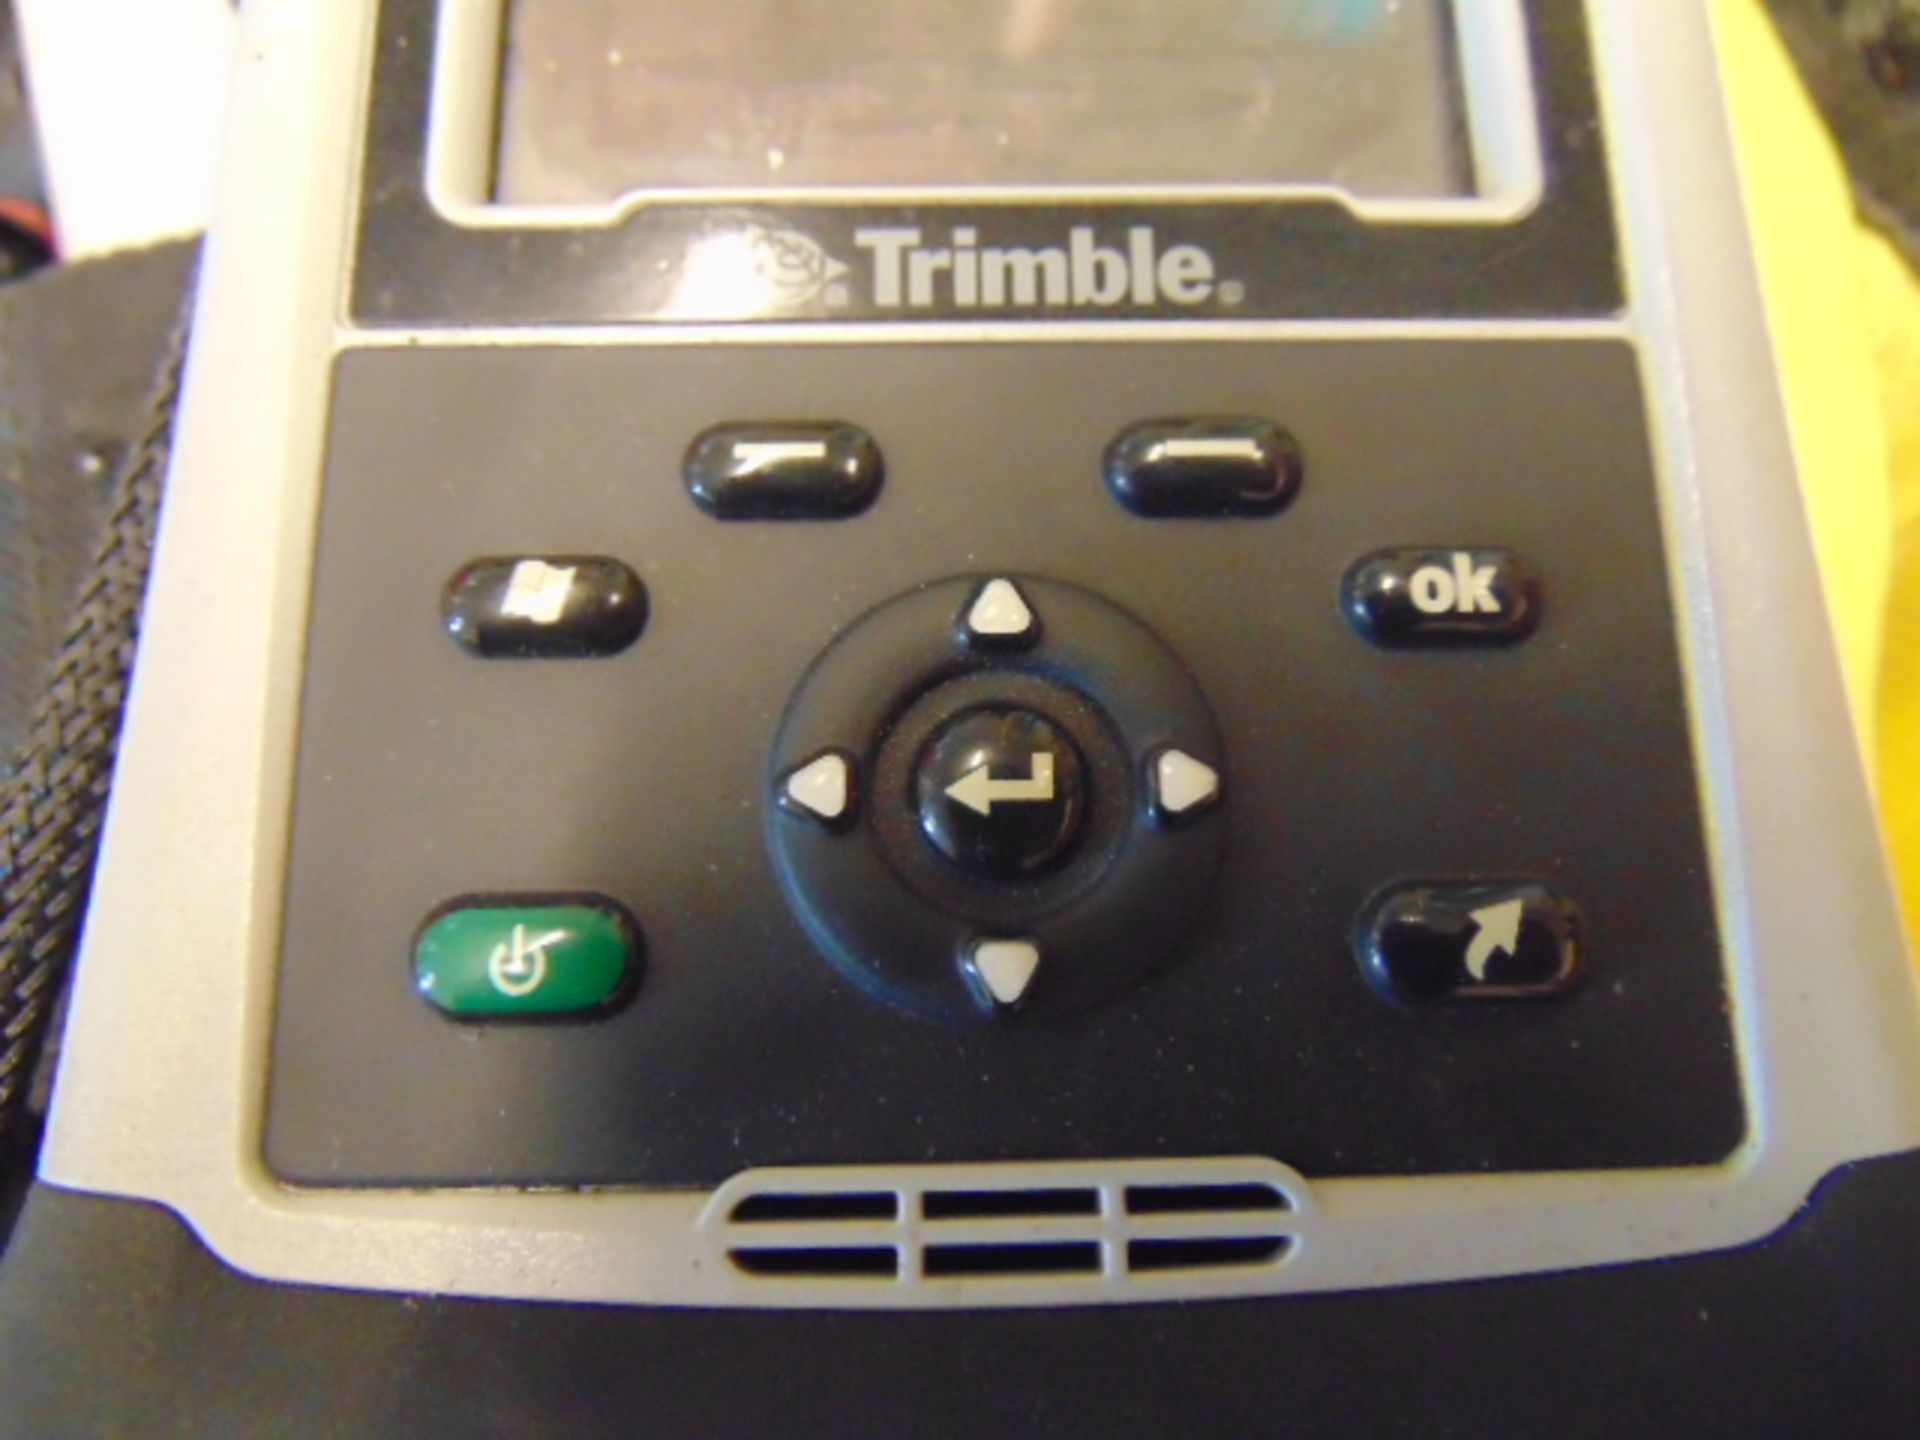 Trimble Nomad Rugged Handheld Computer c/w Accessories as shown - Image 4 of 12